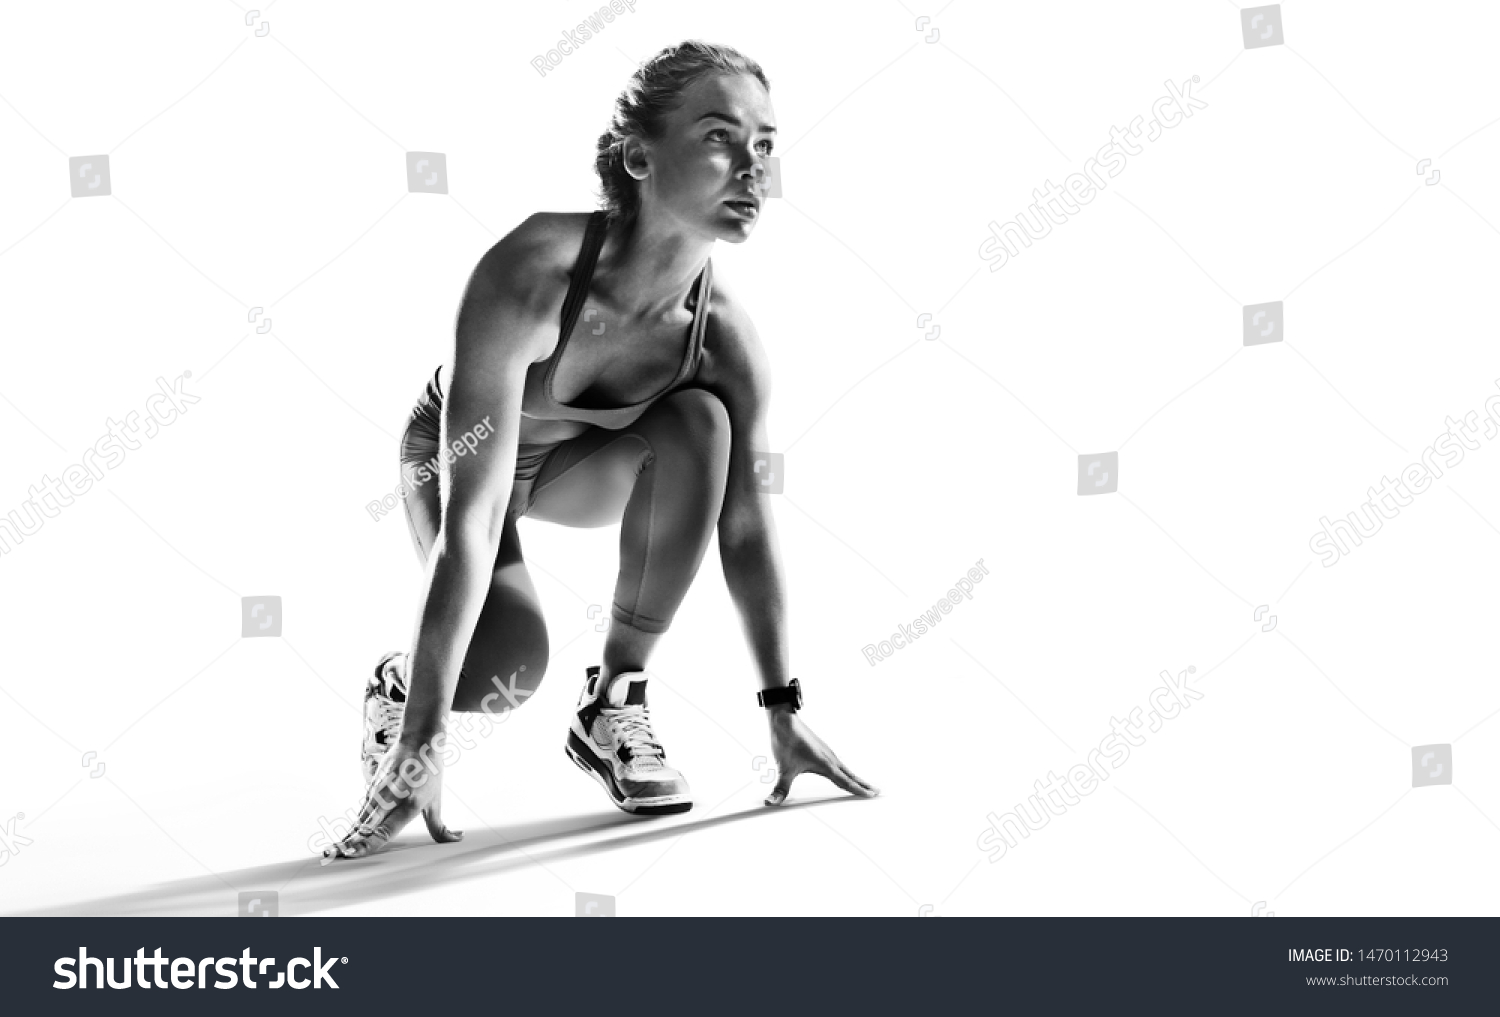 Sports background. Runner on the start. Black and white image isolated on white. #1470112943